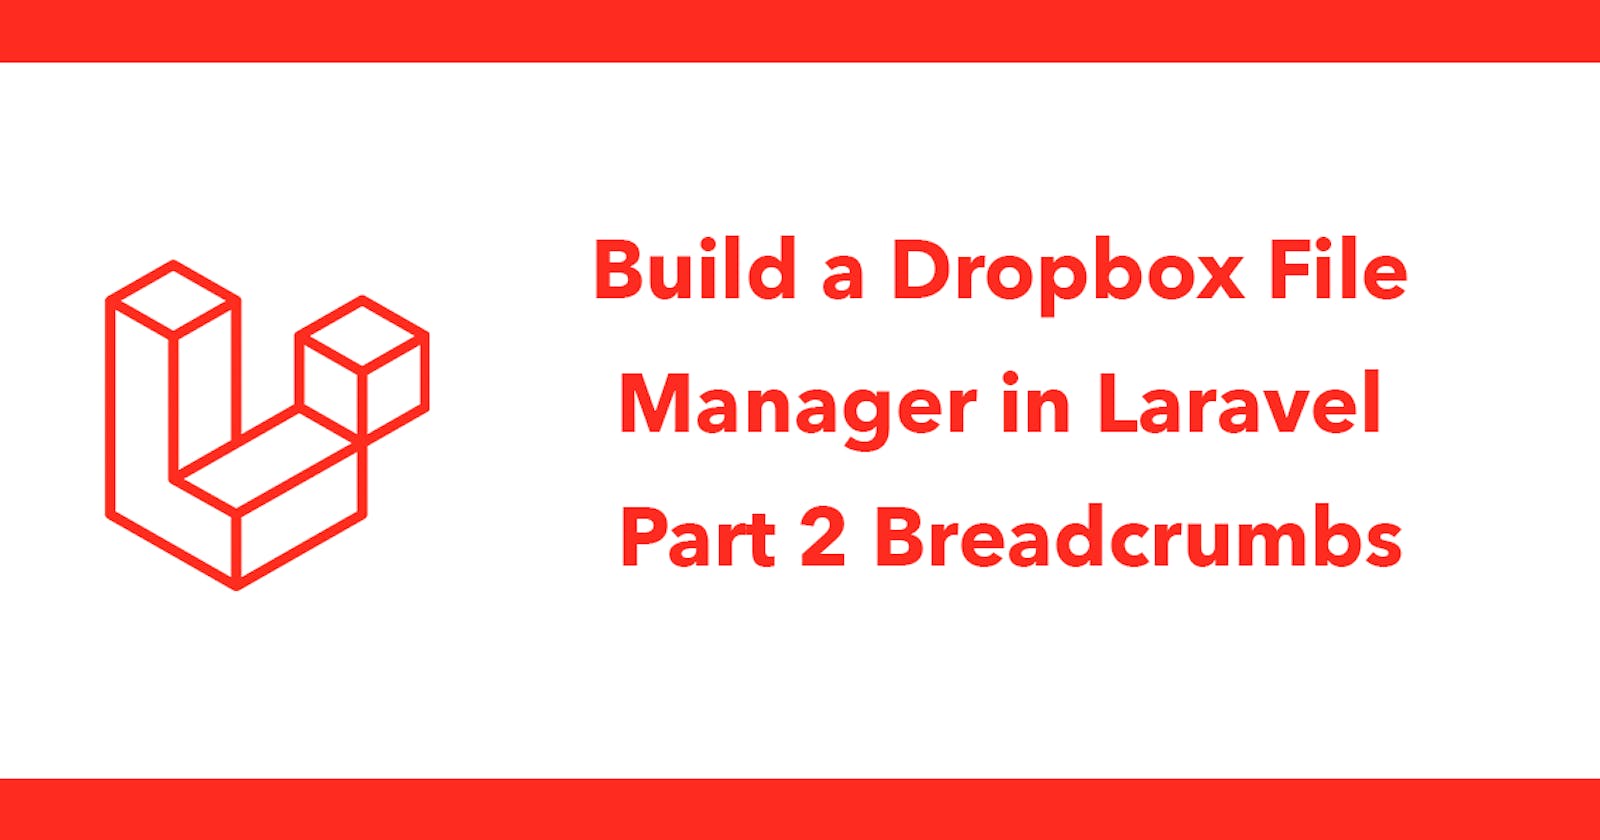 Build a Dropbox File Manager in Laravel - Part 2 Breadcrumbs